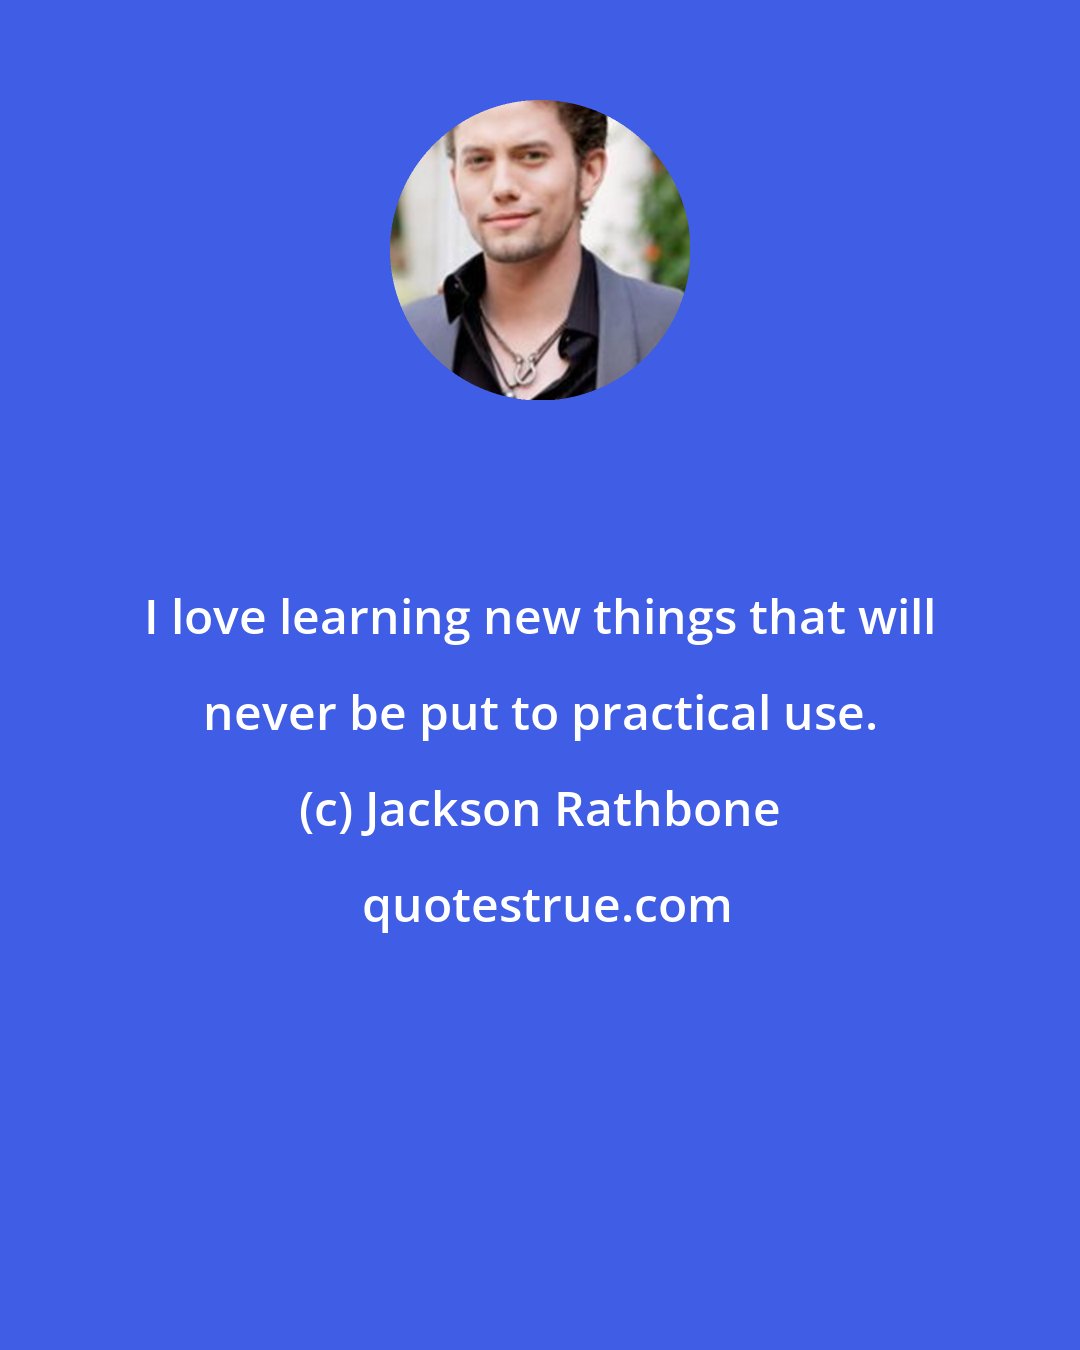 Jackson Rathbone: I love learning new things that will never be put to practical use.